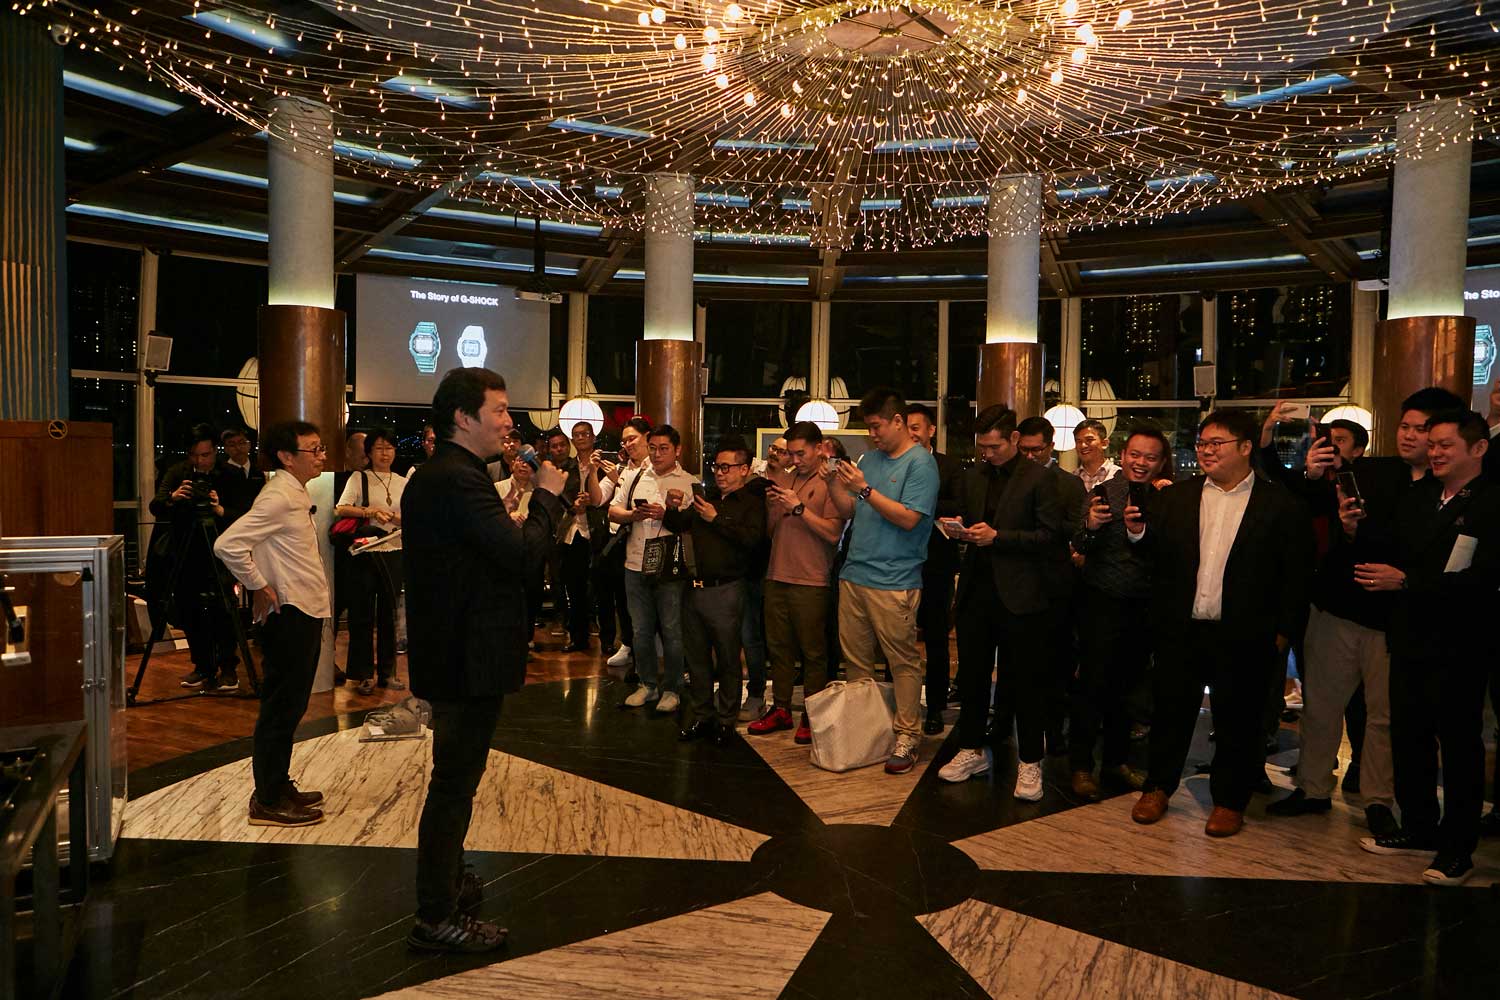 Founding editor, Wei Koh welcoming guests to the G-SHOCK x Revolution dinner event